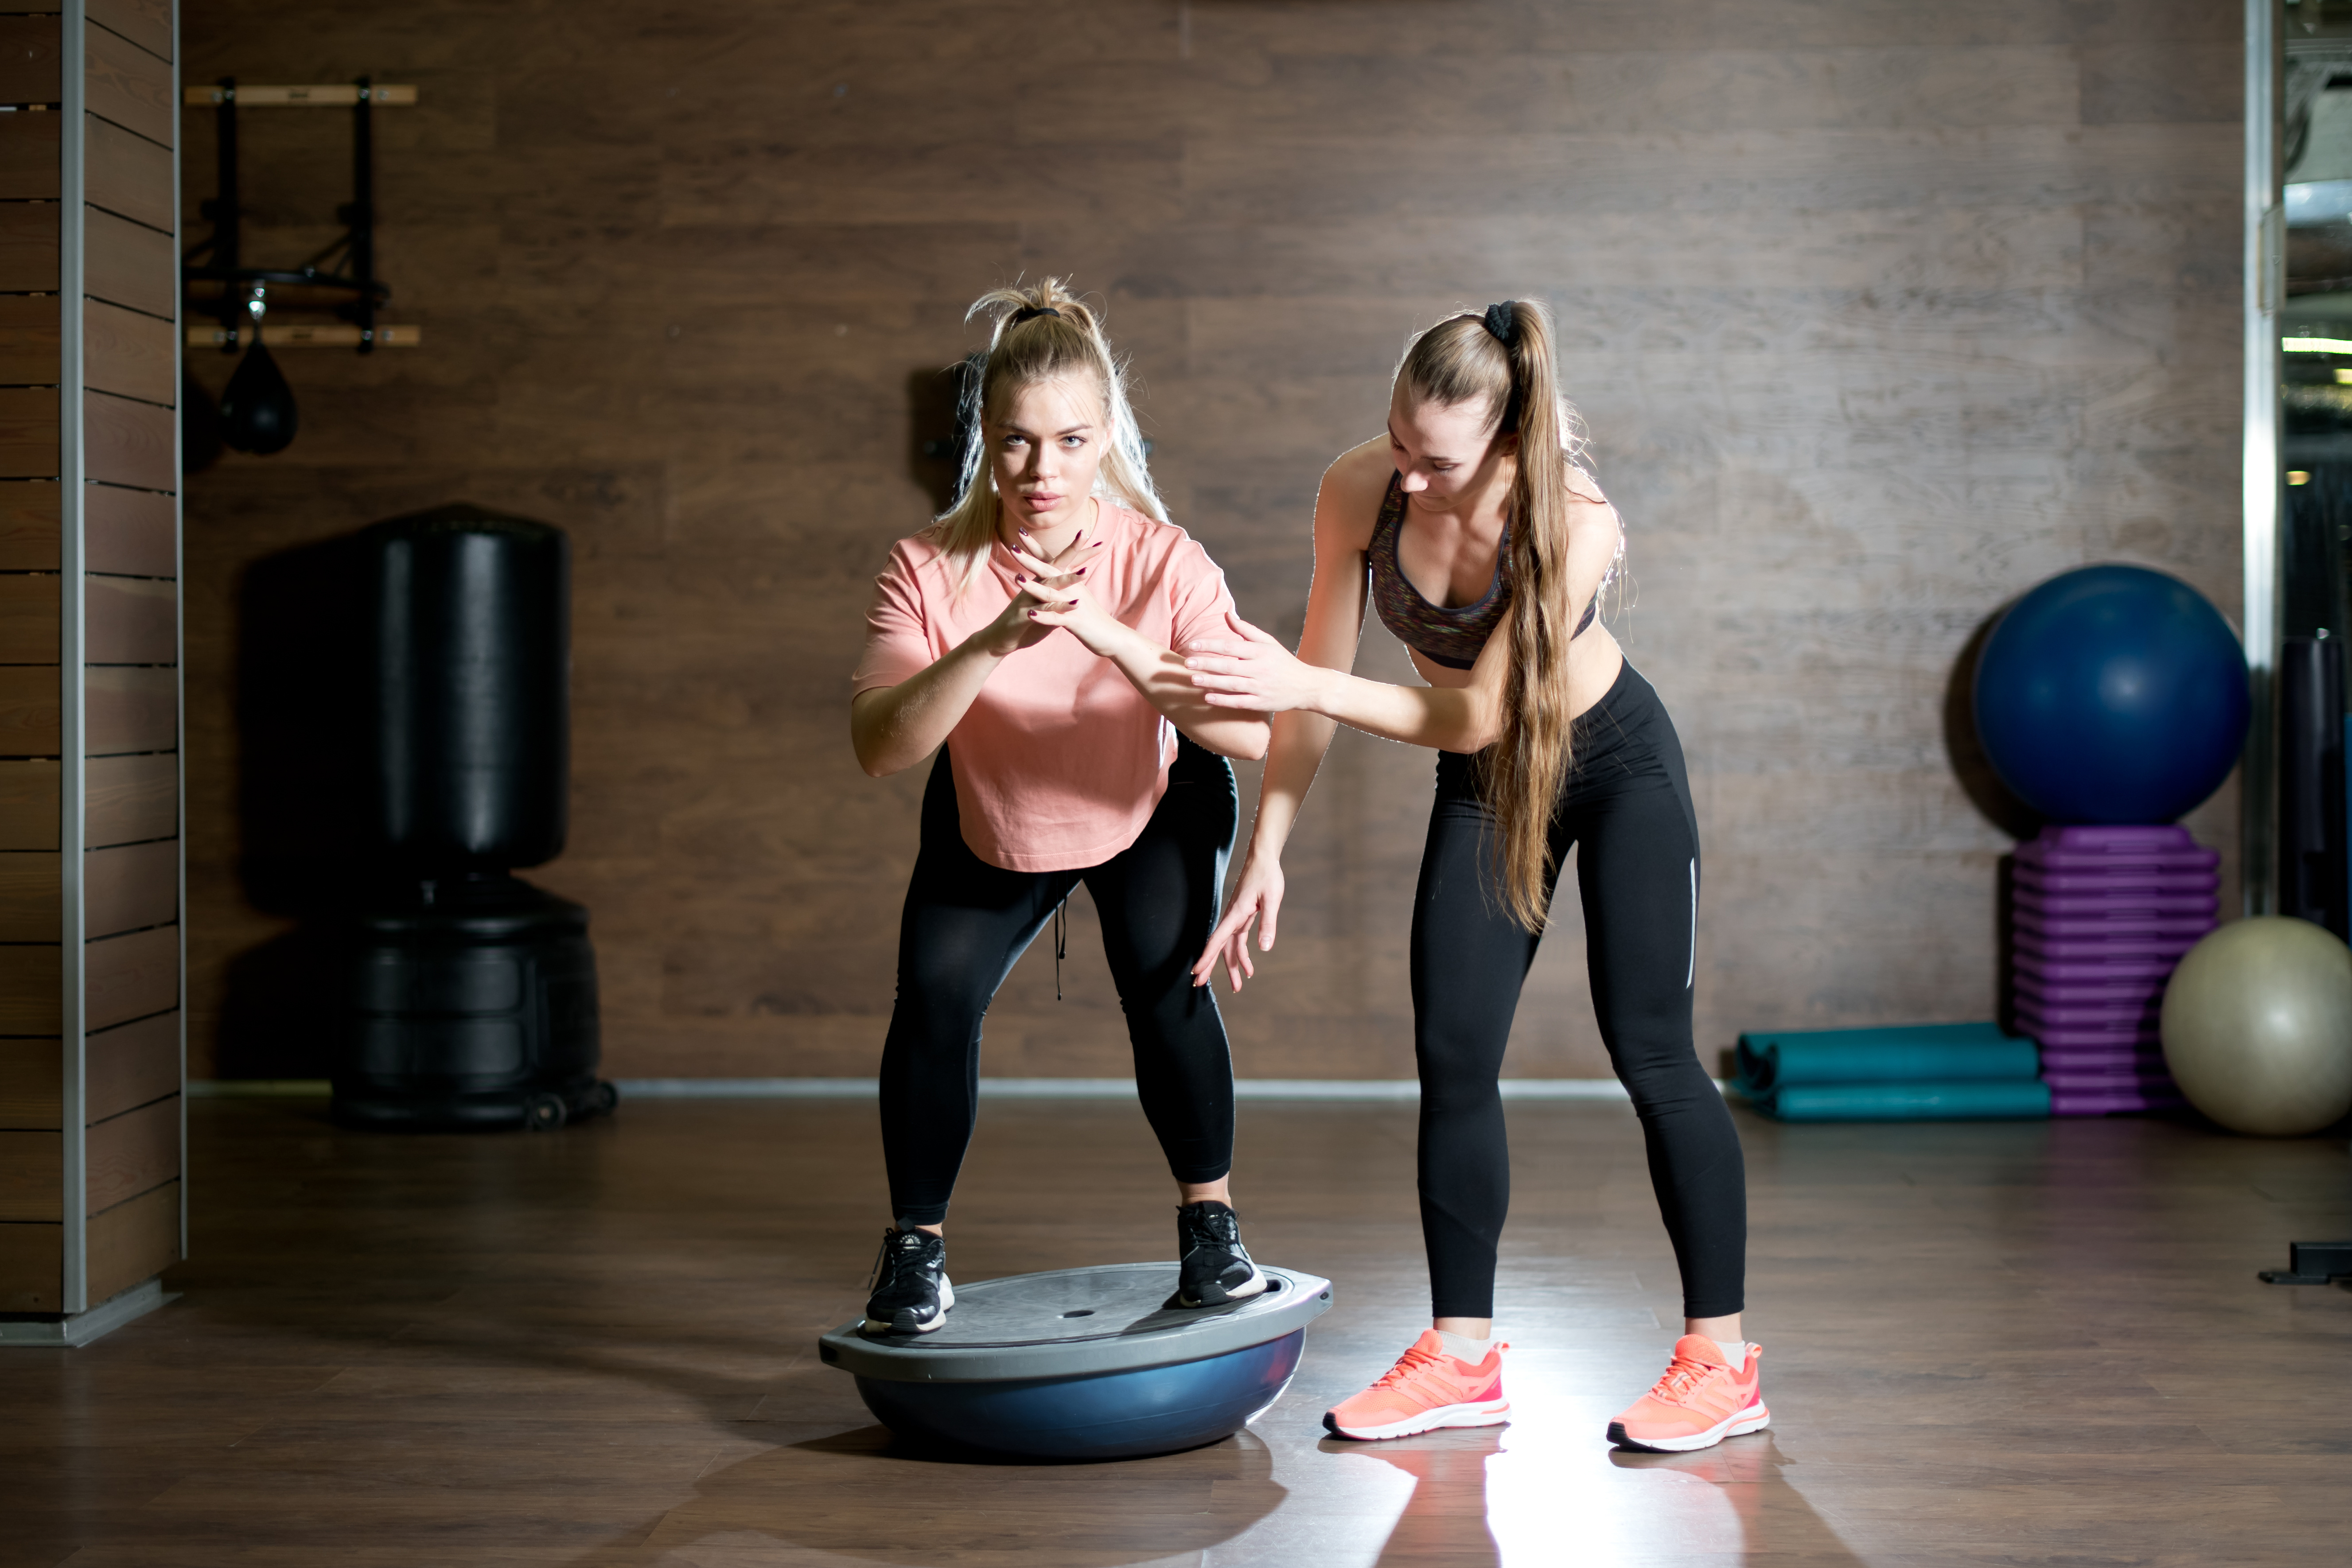 MCC offering Bosu HIIT classes this fall